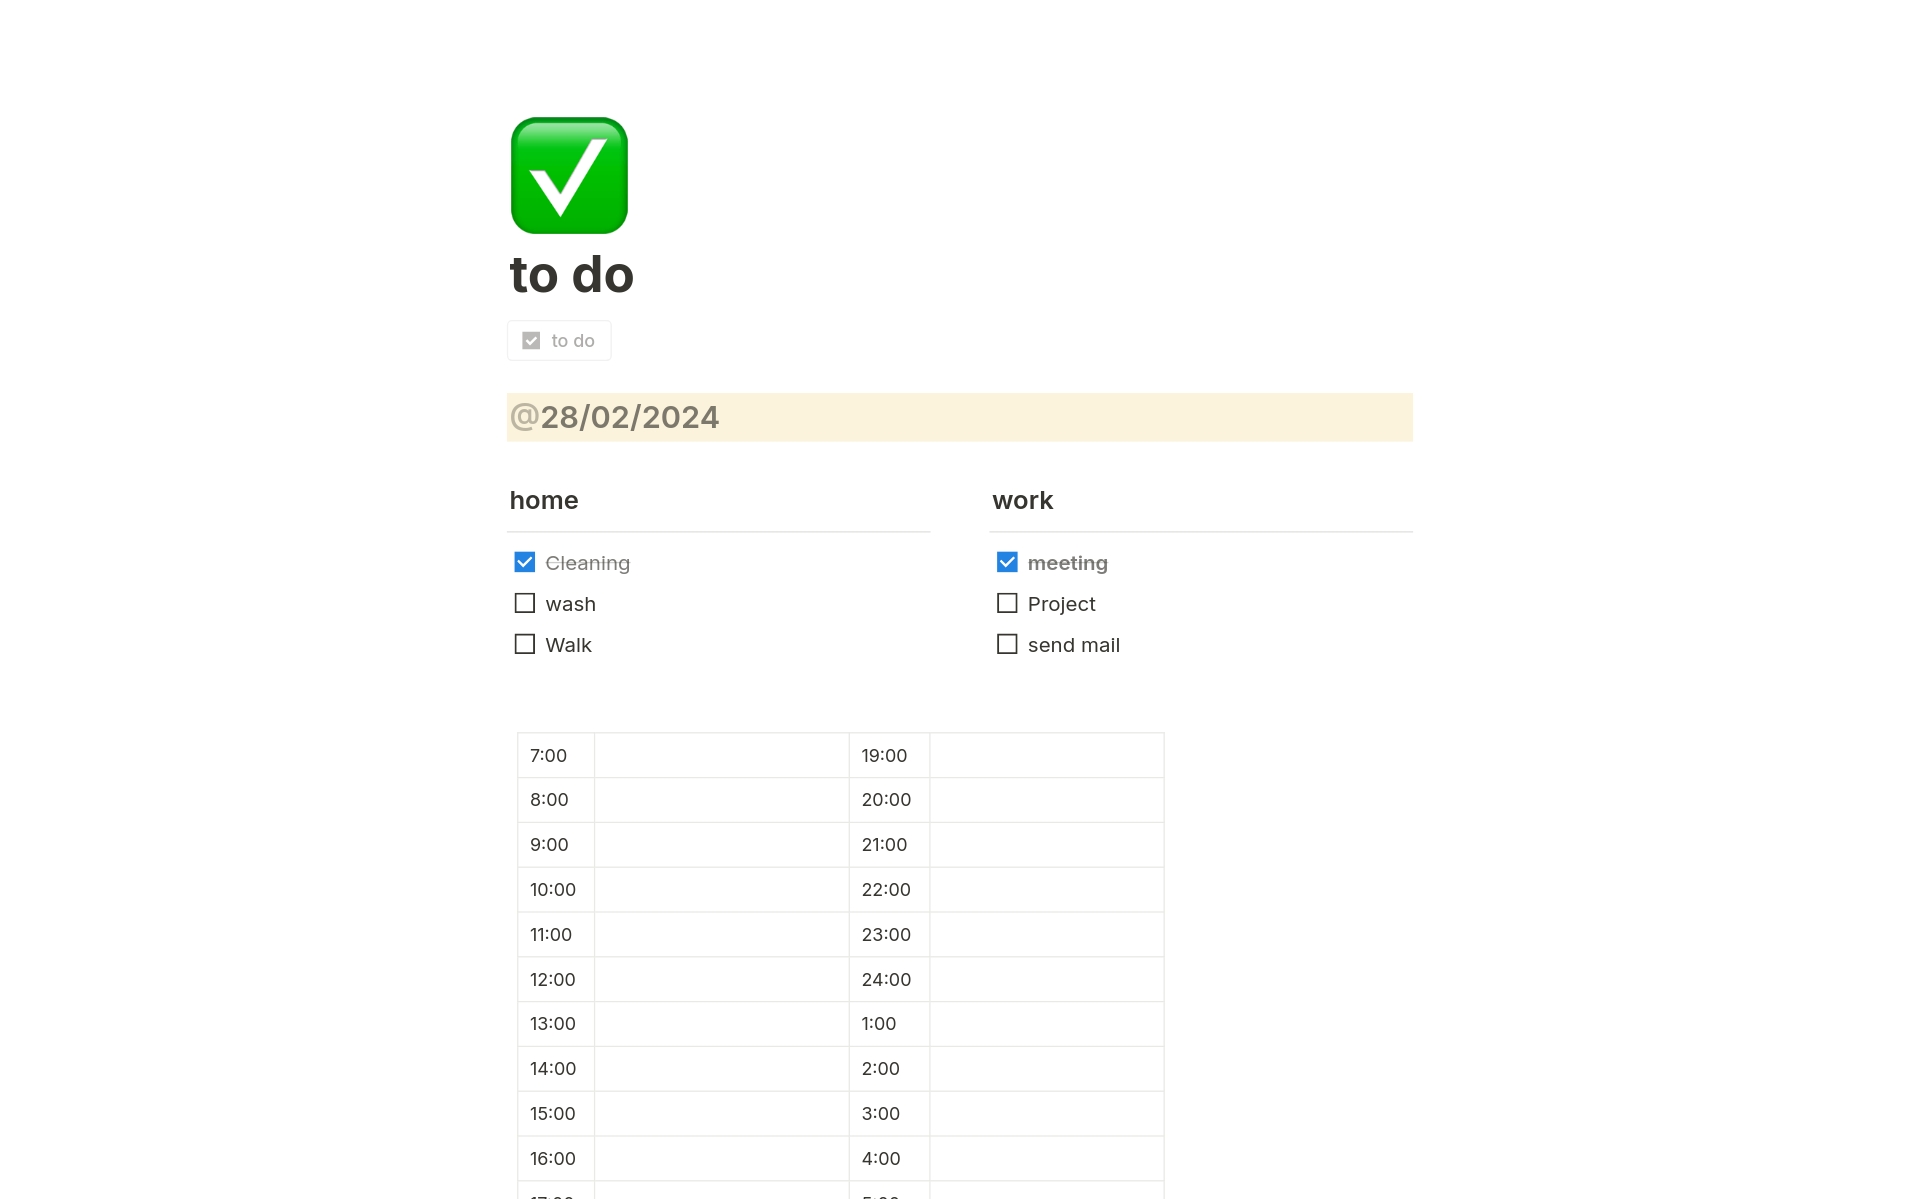 Organize what you need to do today by checklist and time. You can use it as a new template every day by clicking the to do button at the top.